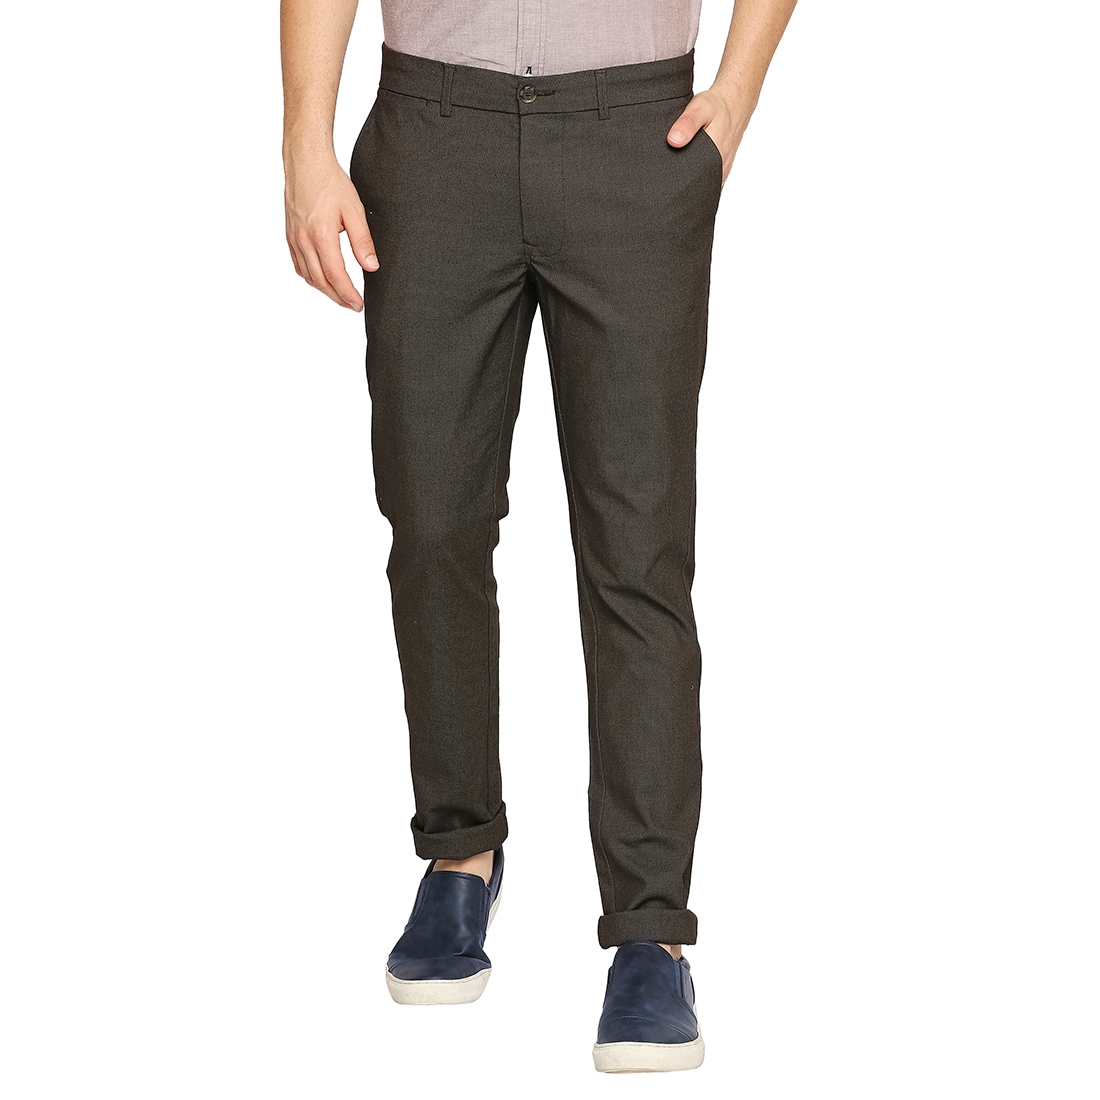 Basics | BASICS CASUAL SELF BROWN COTTON POLYESTER STRETCH SKINNY TROUSERS -21BTR46898